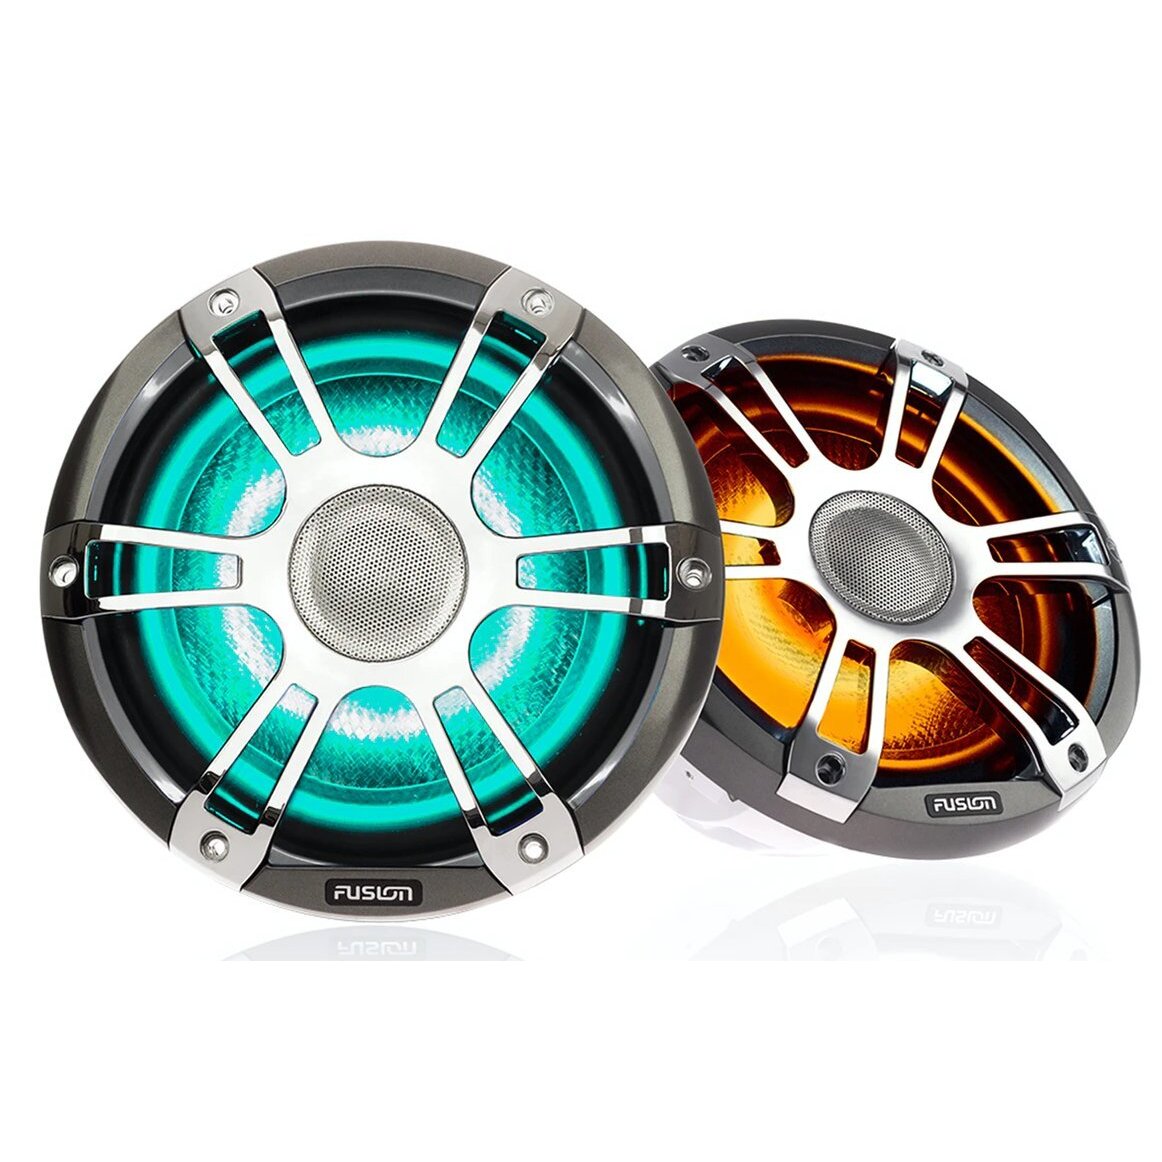 Fusion SG-CL772SPC Silver/Chrome 7.7" Signature Series 3 280 Watt Waterproof Marine Speakers With CRGBW LED Accent Lighting